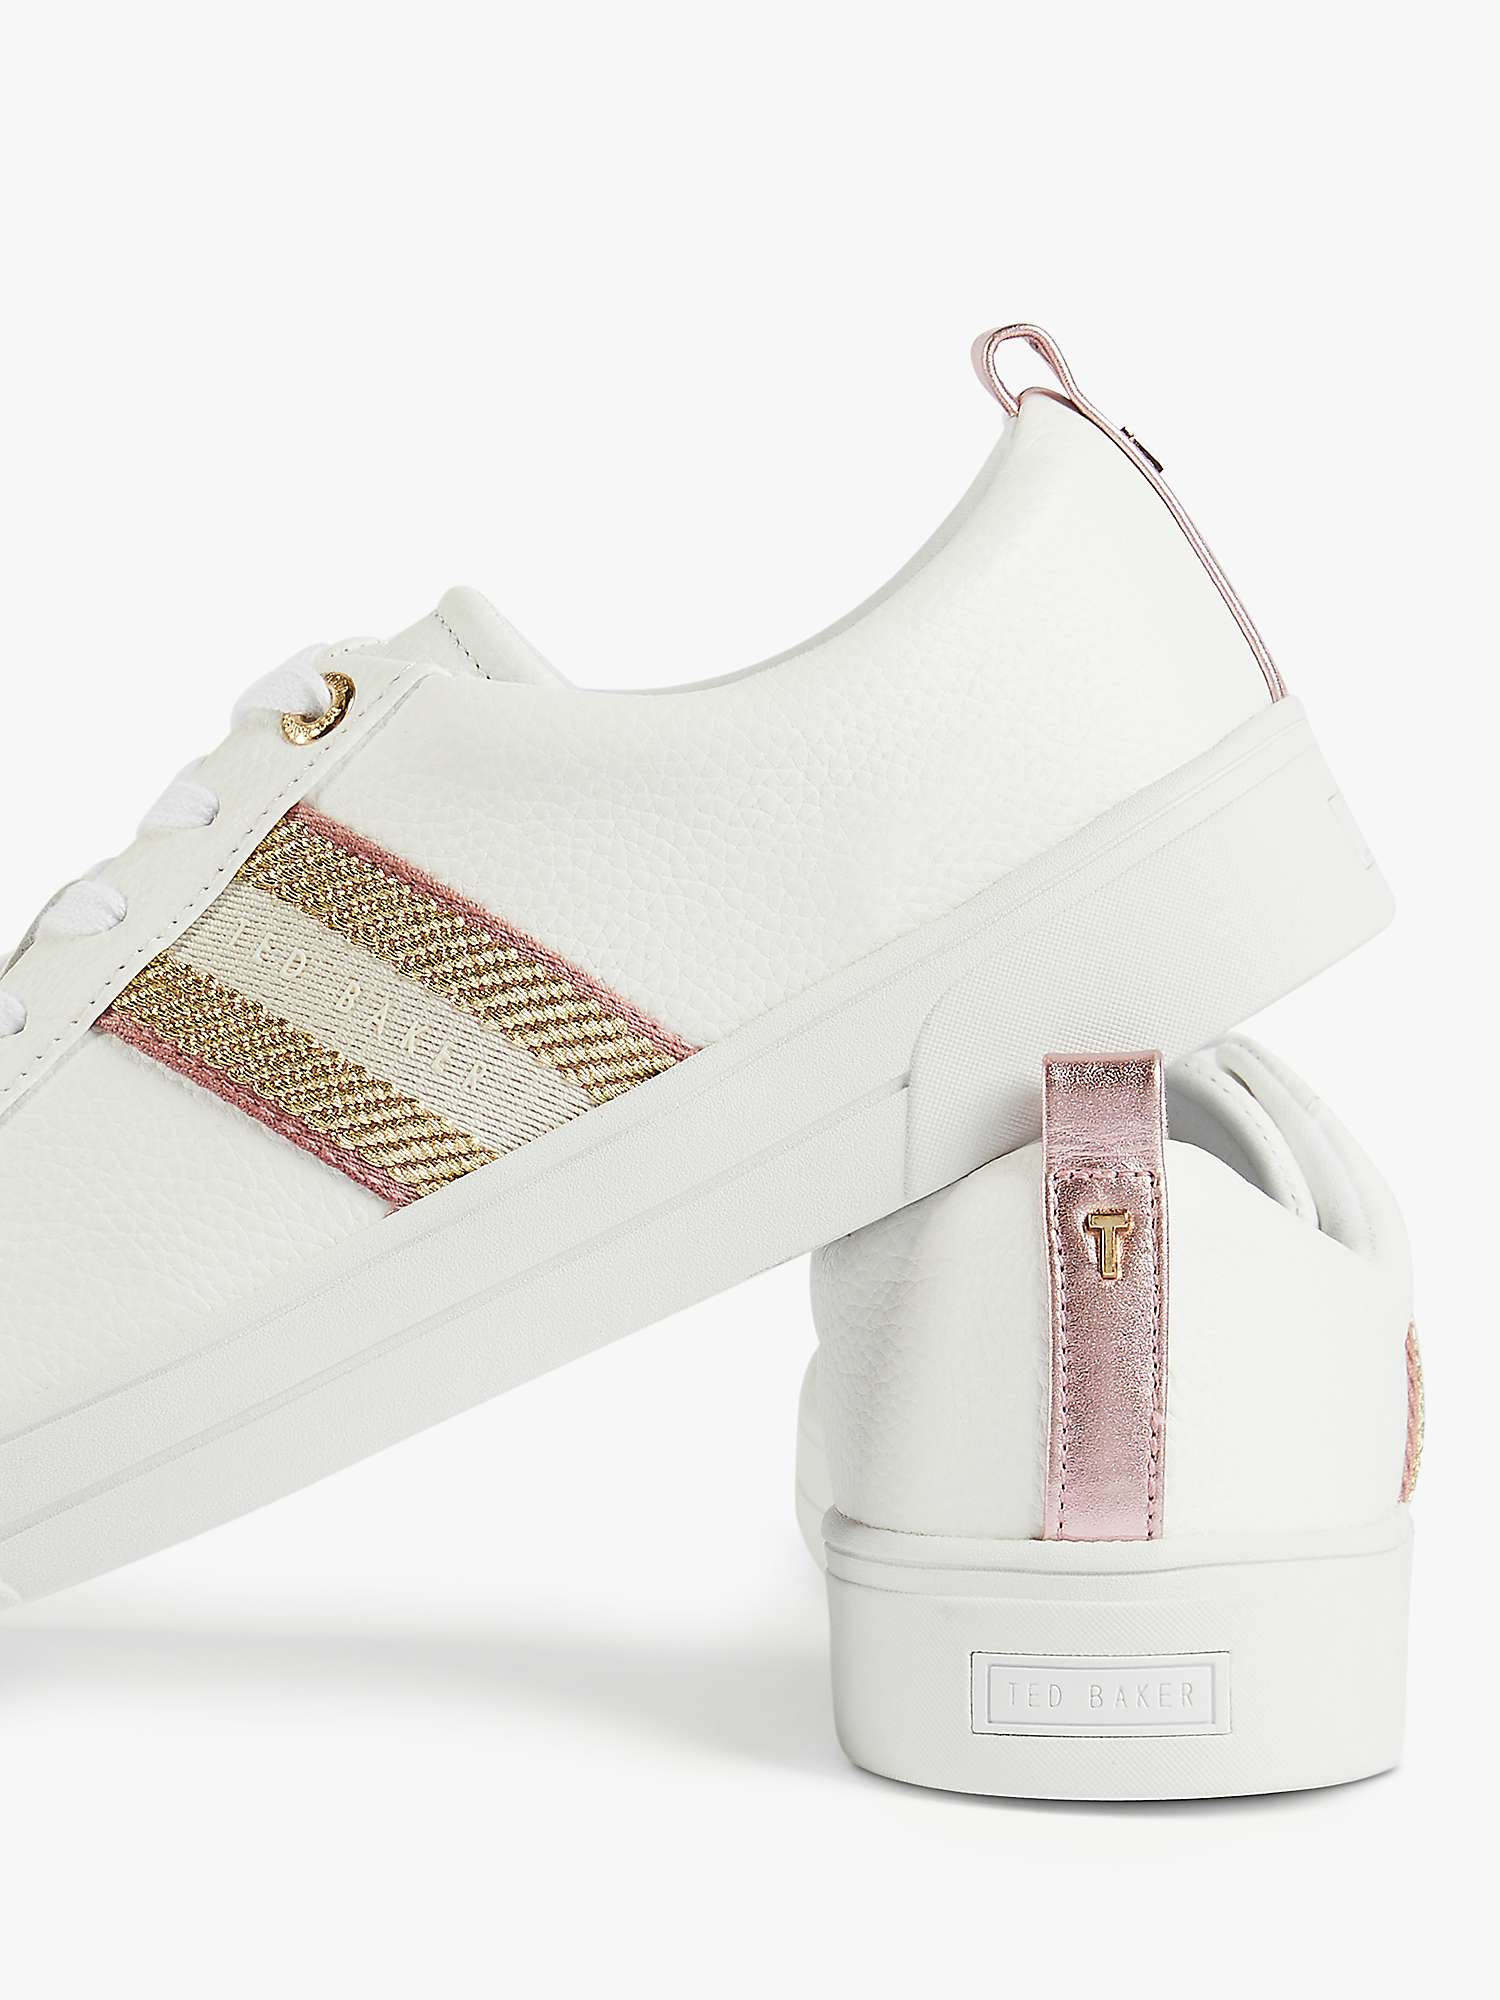 Buy Ted Baker Baily Trainers, White/Metallic Online at johnlewis.com